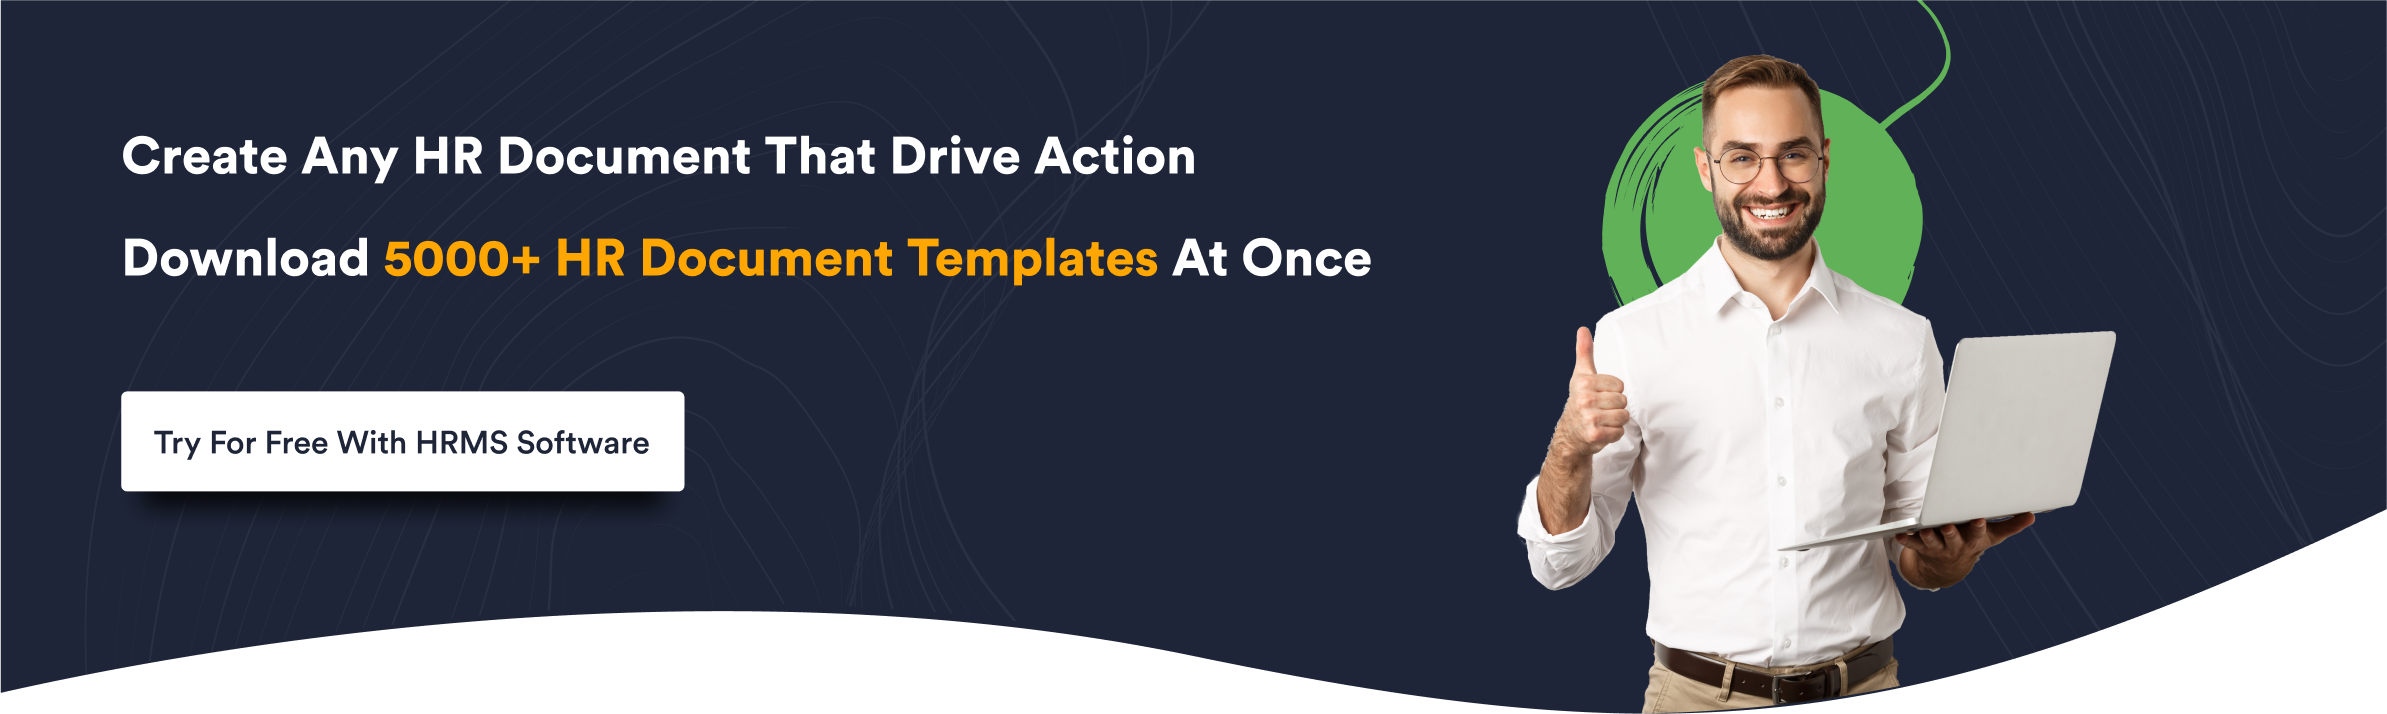 Create Any HR Document That Drive Action 1